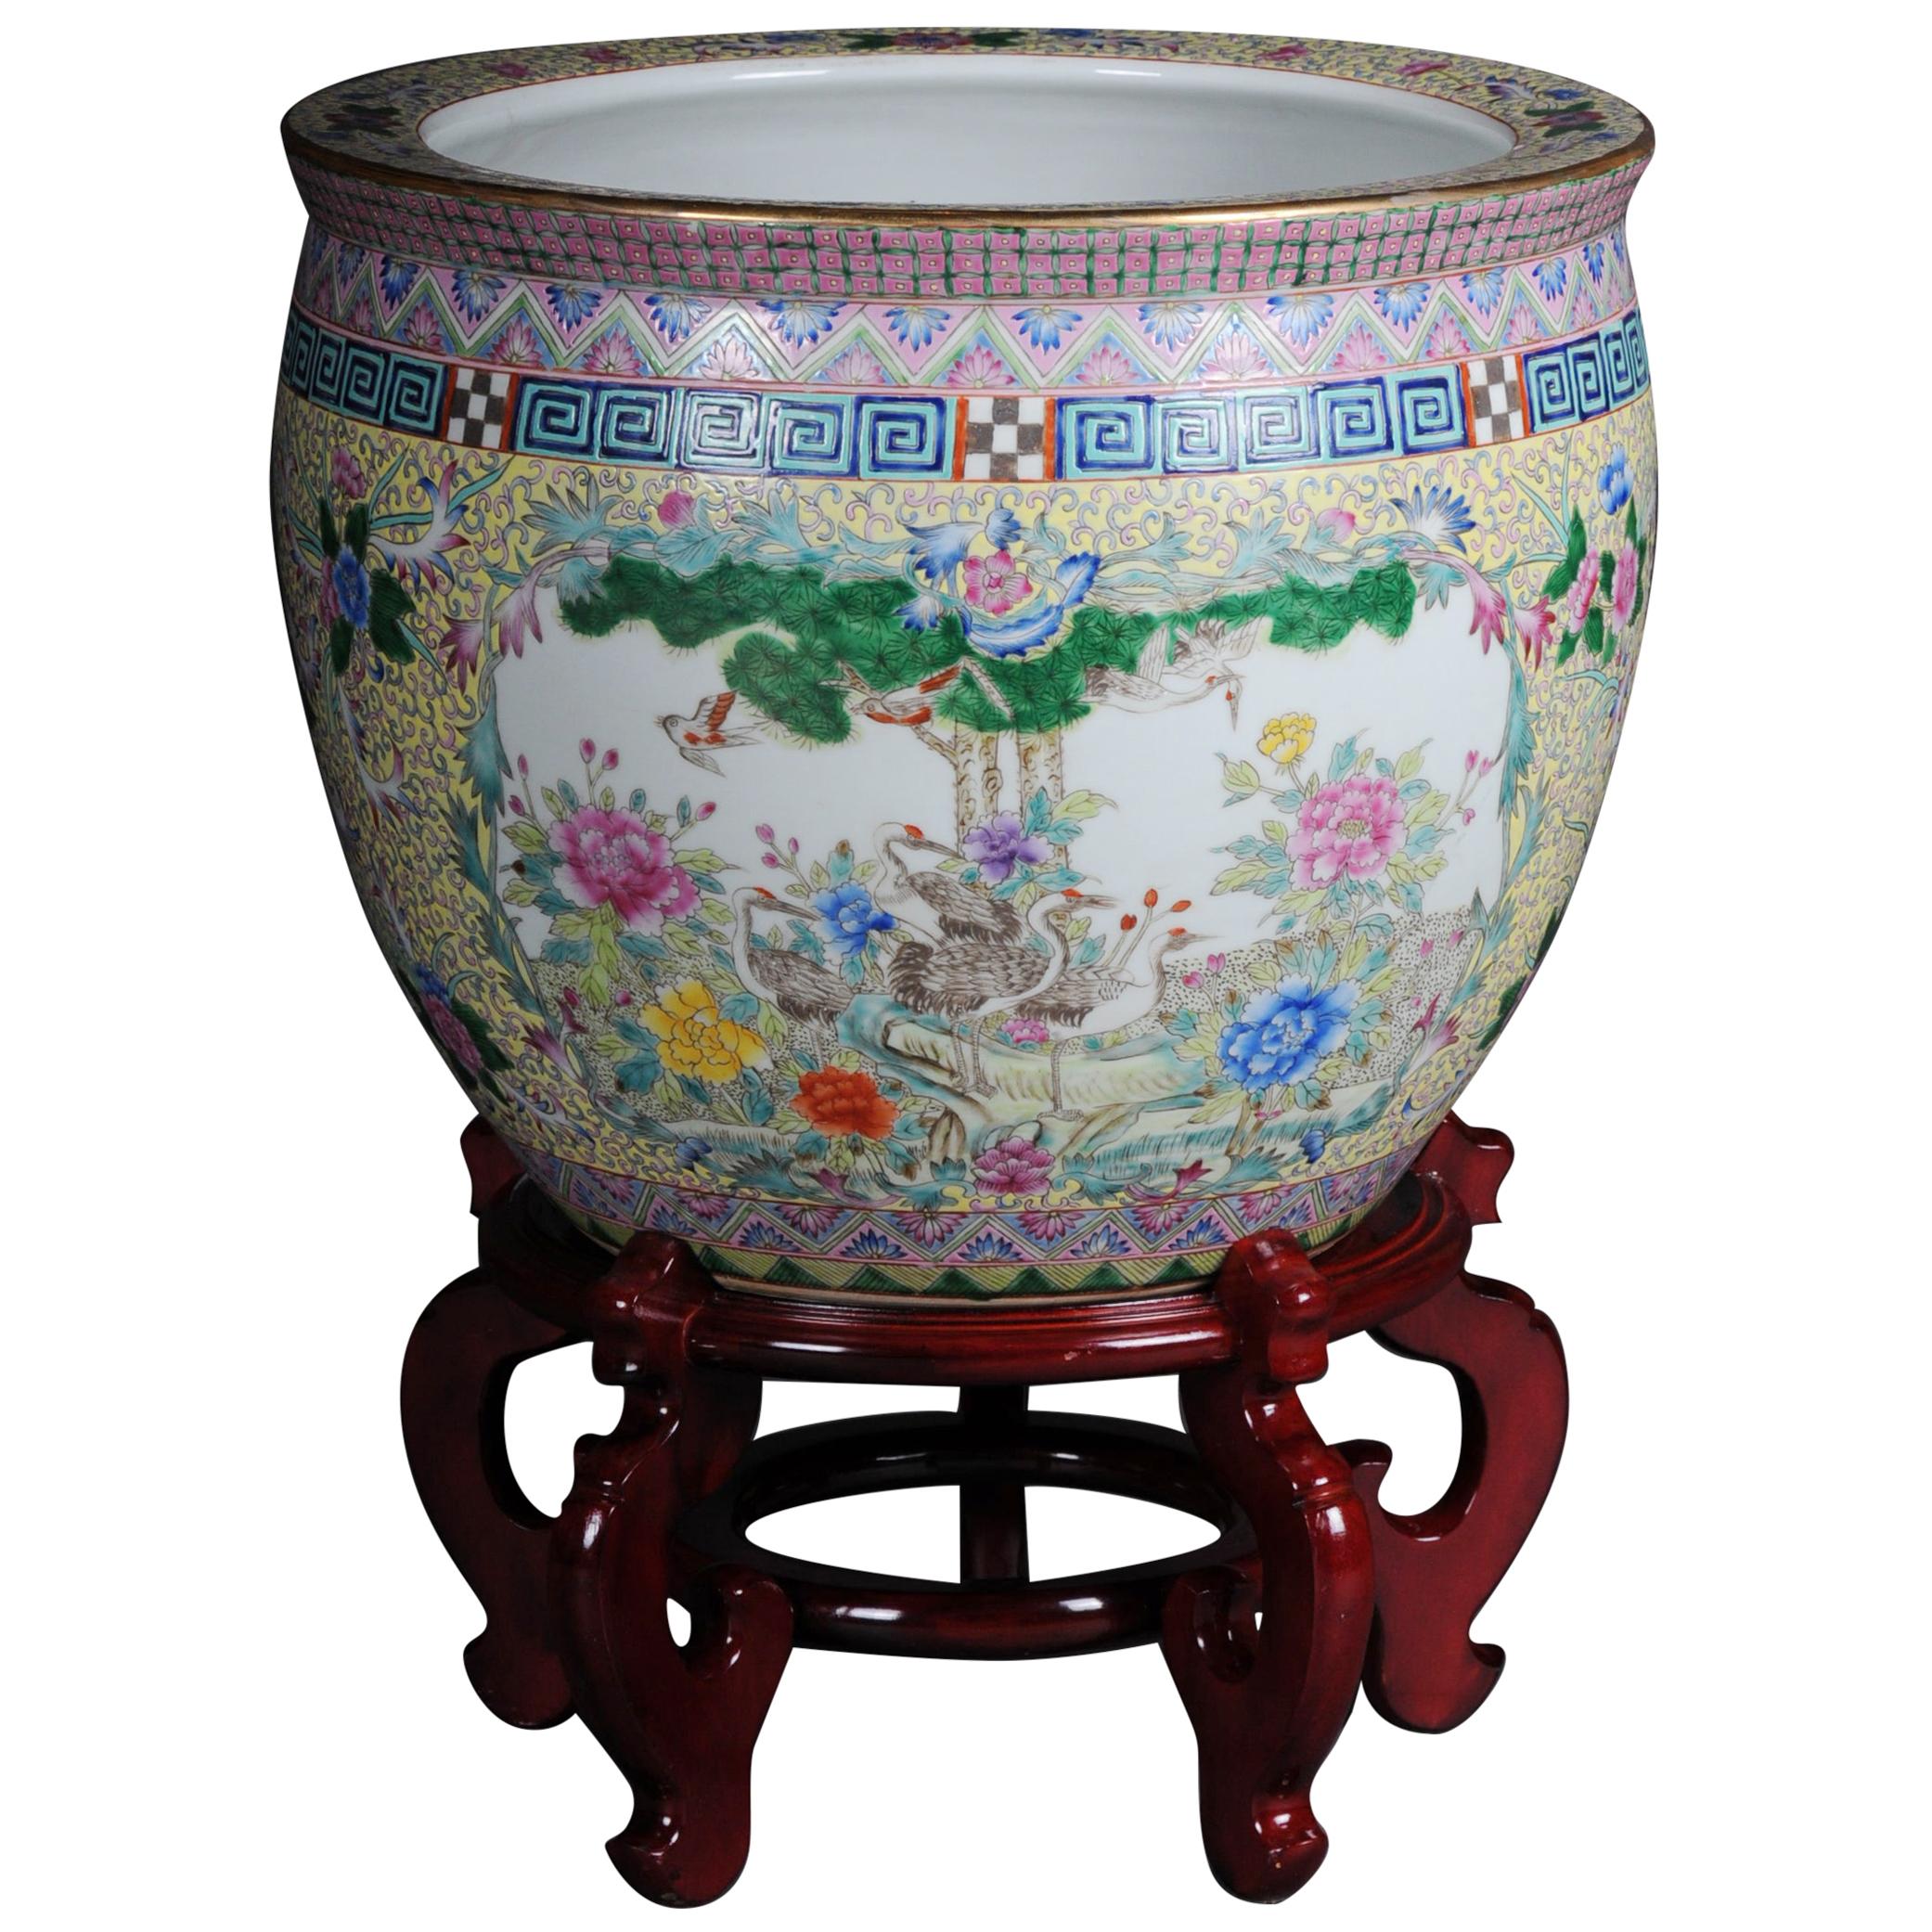 Oversized Chinese Flowerpot Floor Vase with Stand, Asia, 20th Century